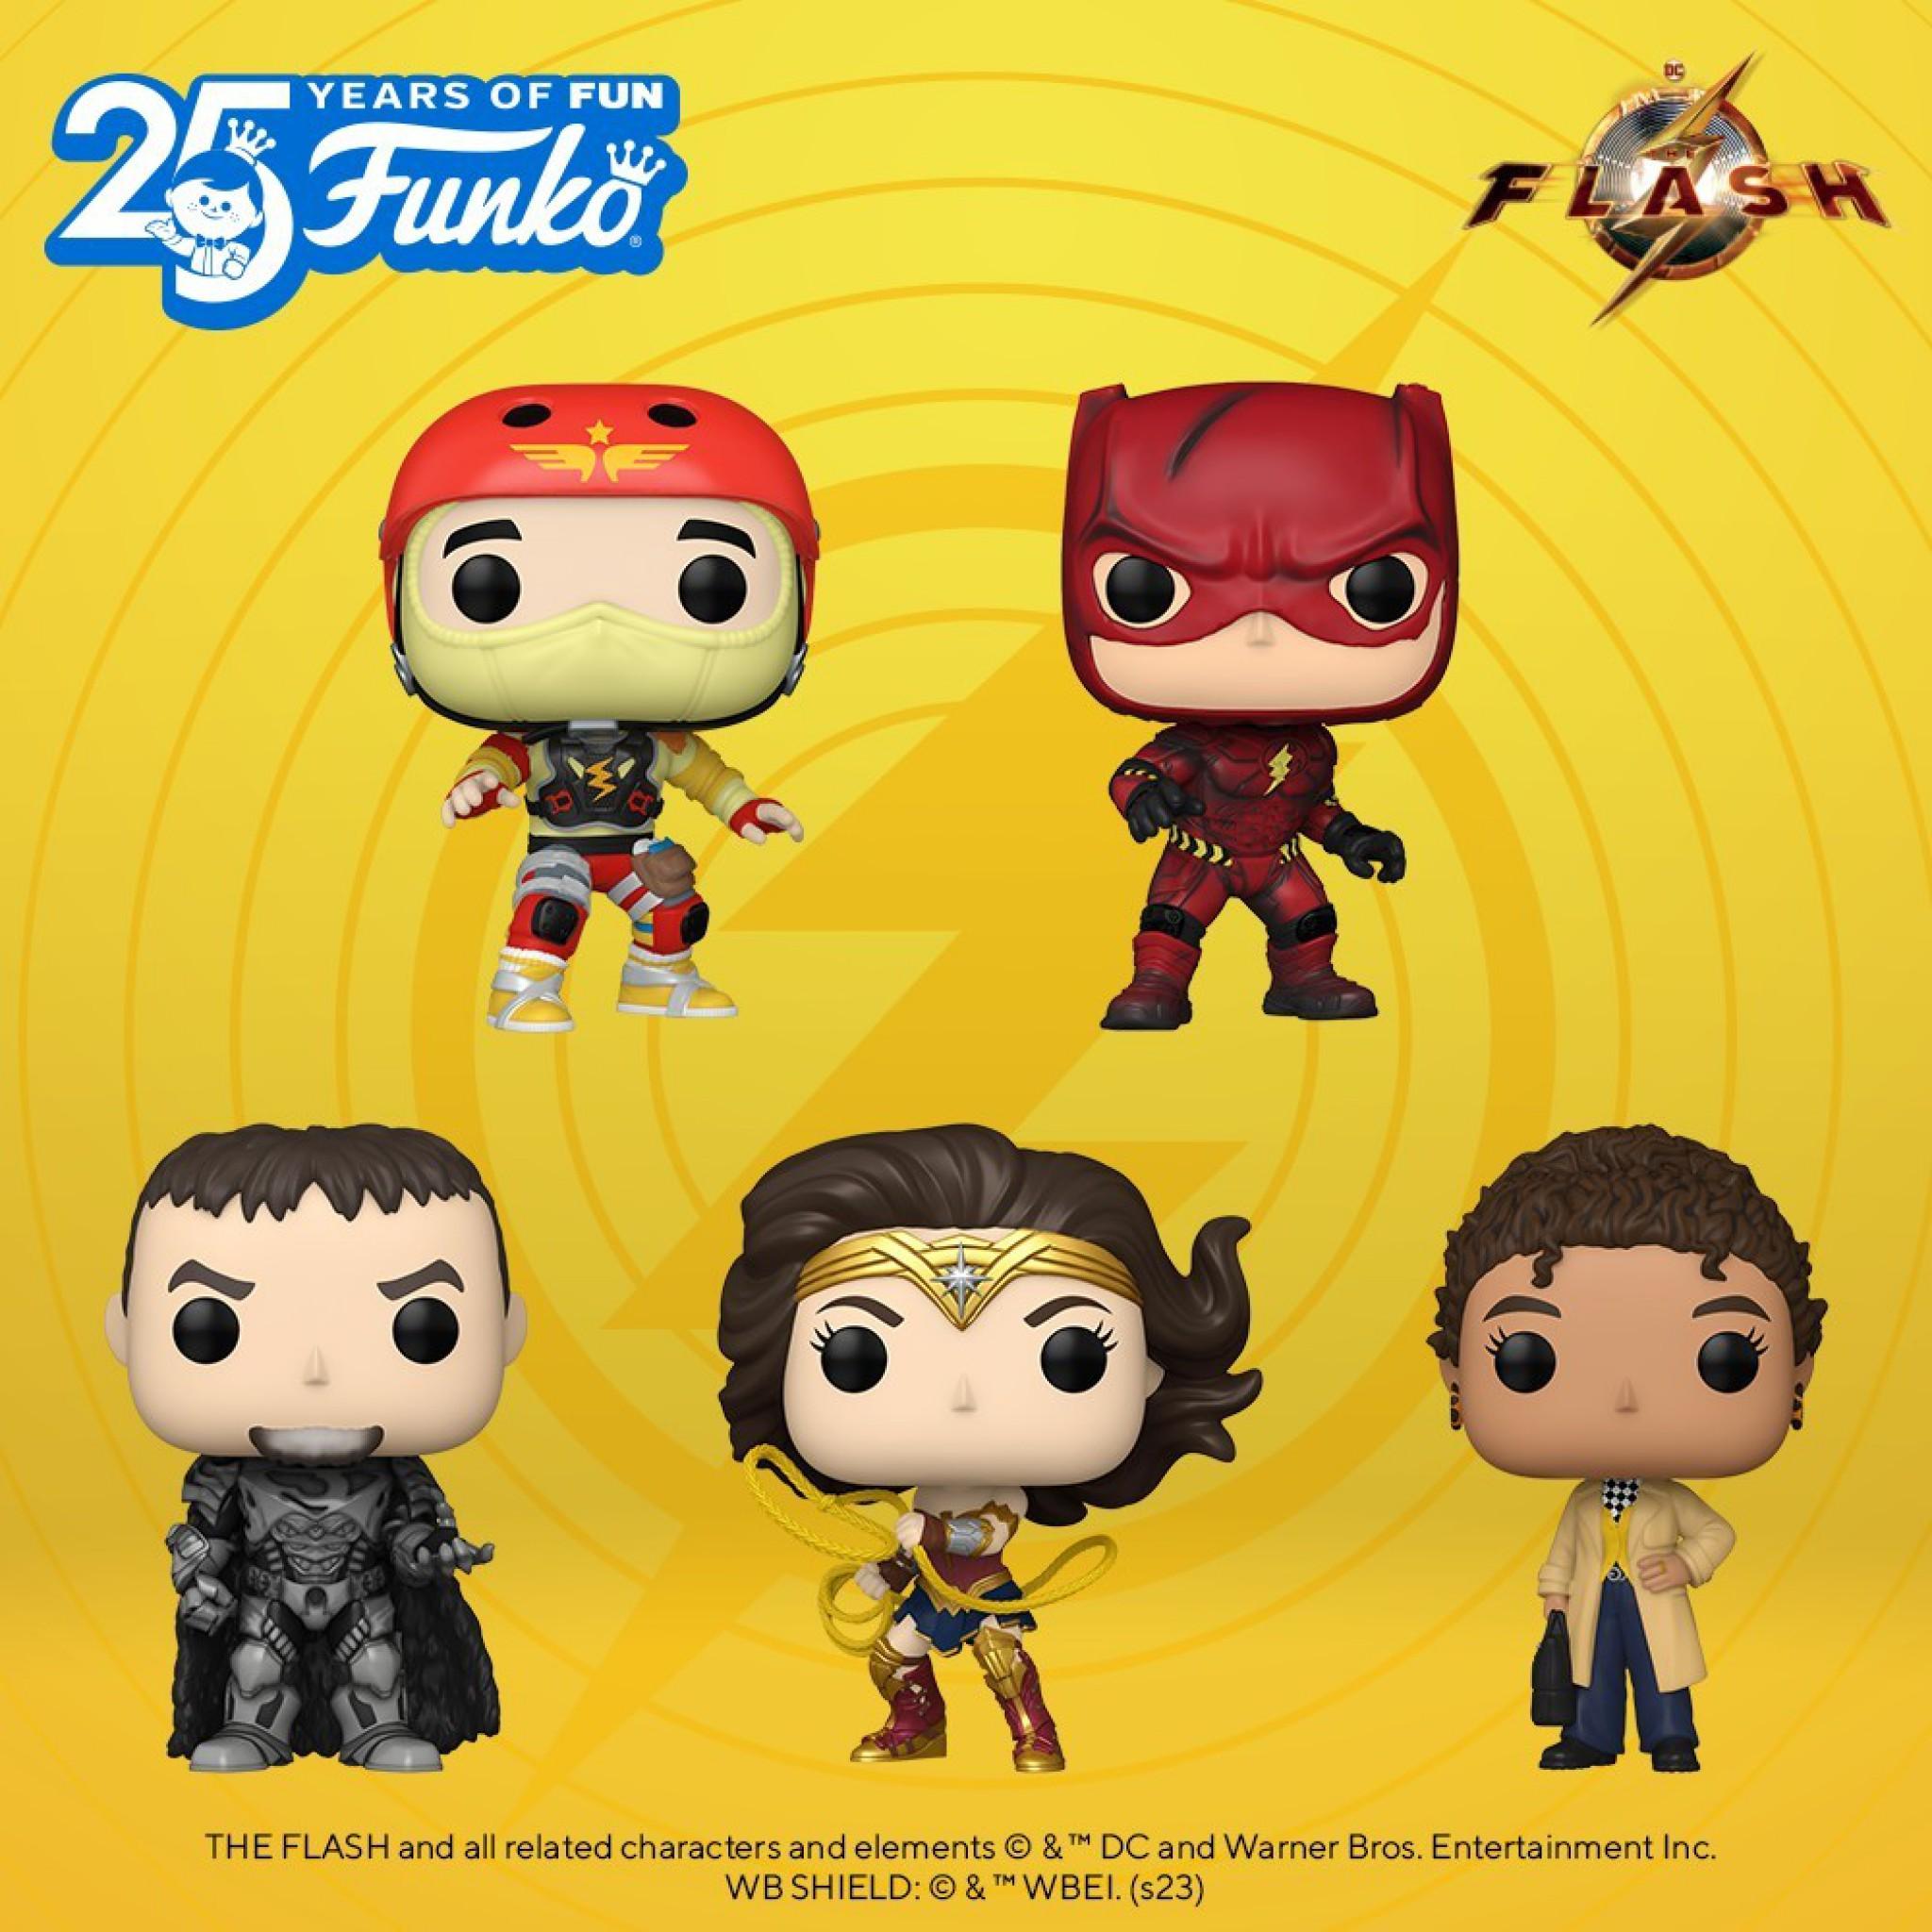 Second wave of POPs for The Flash